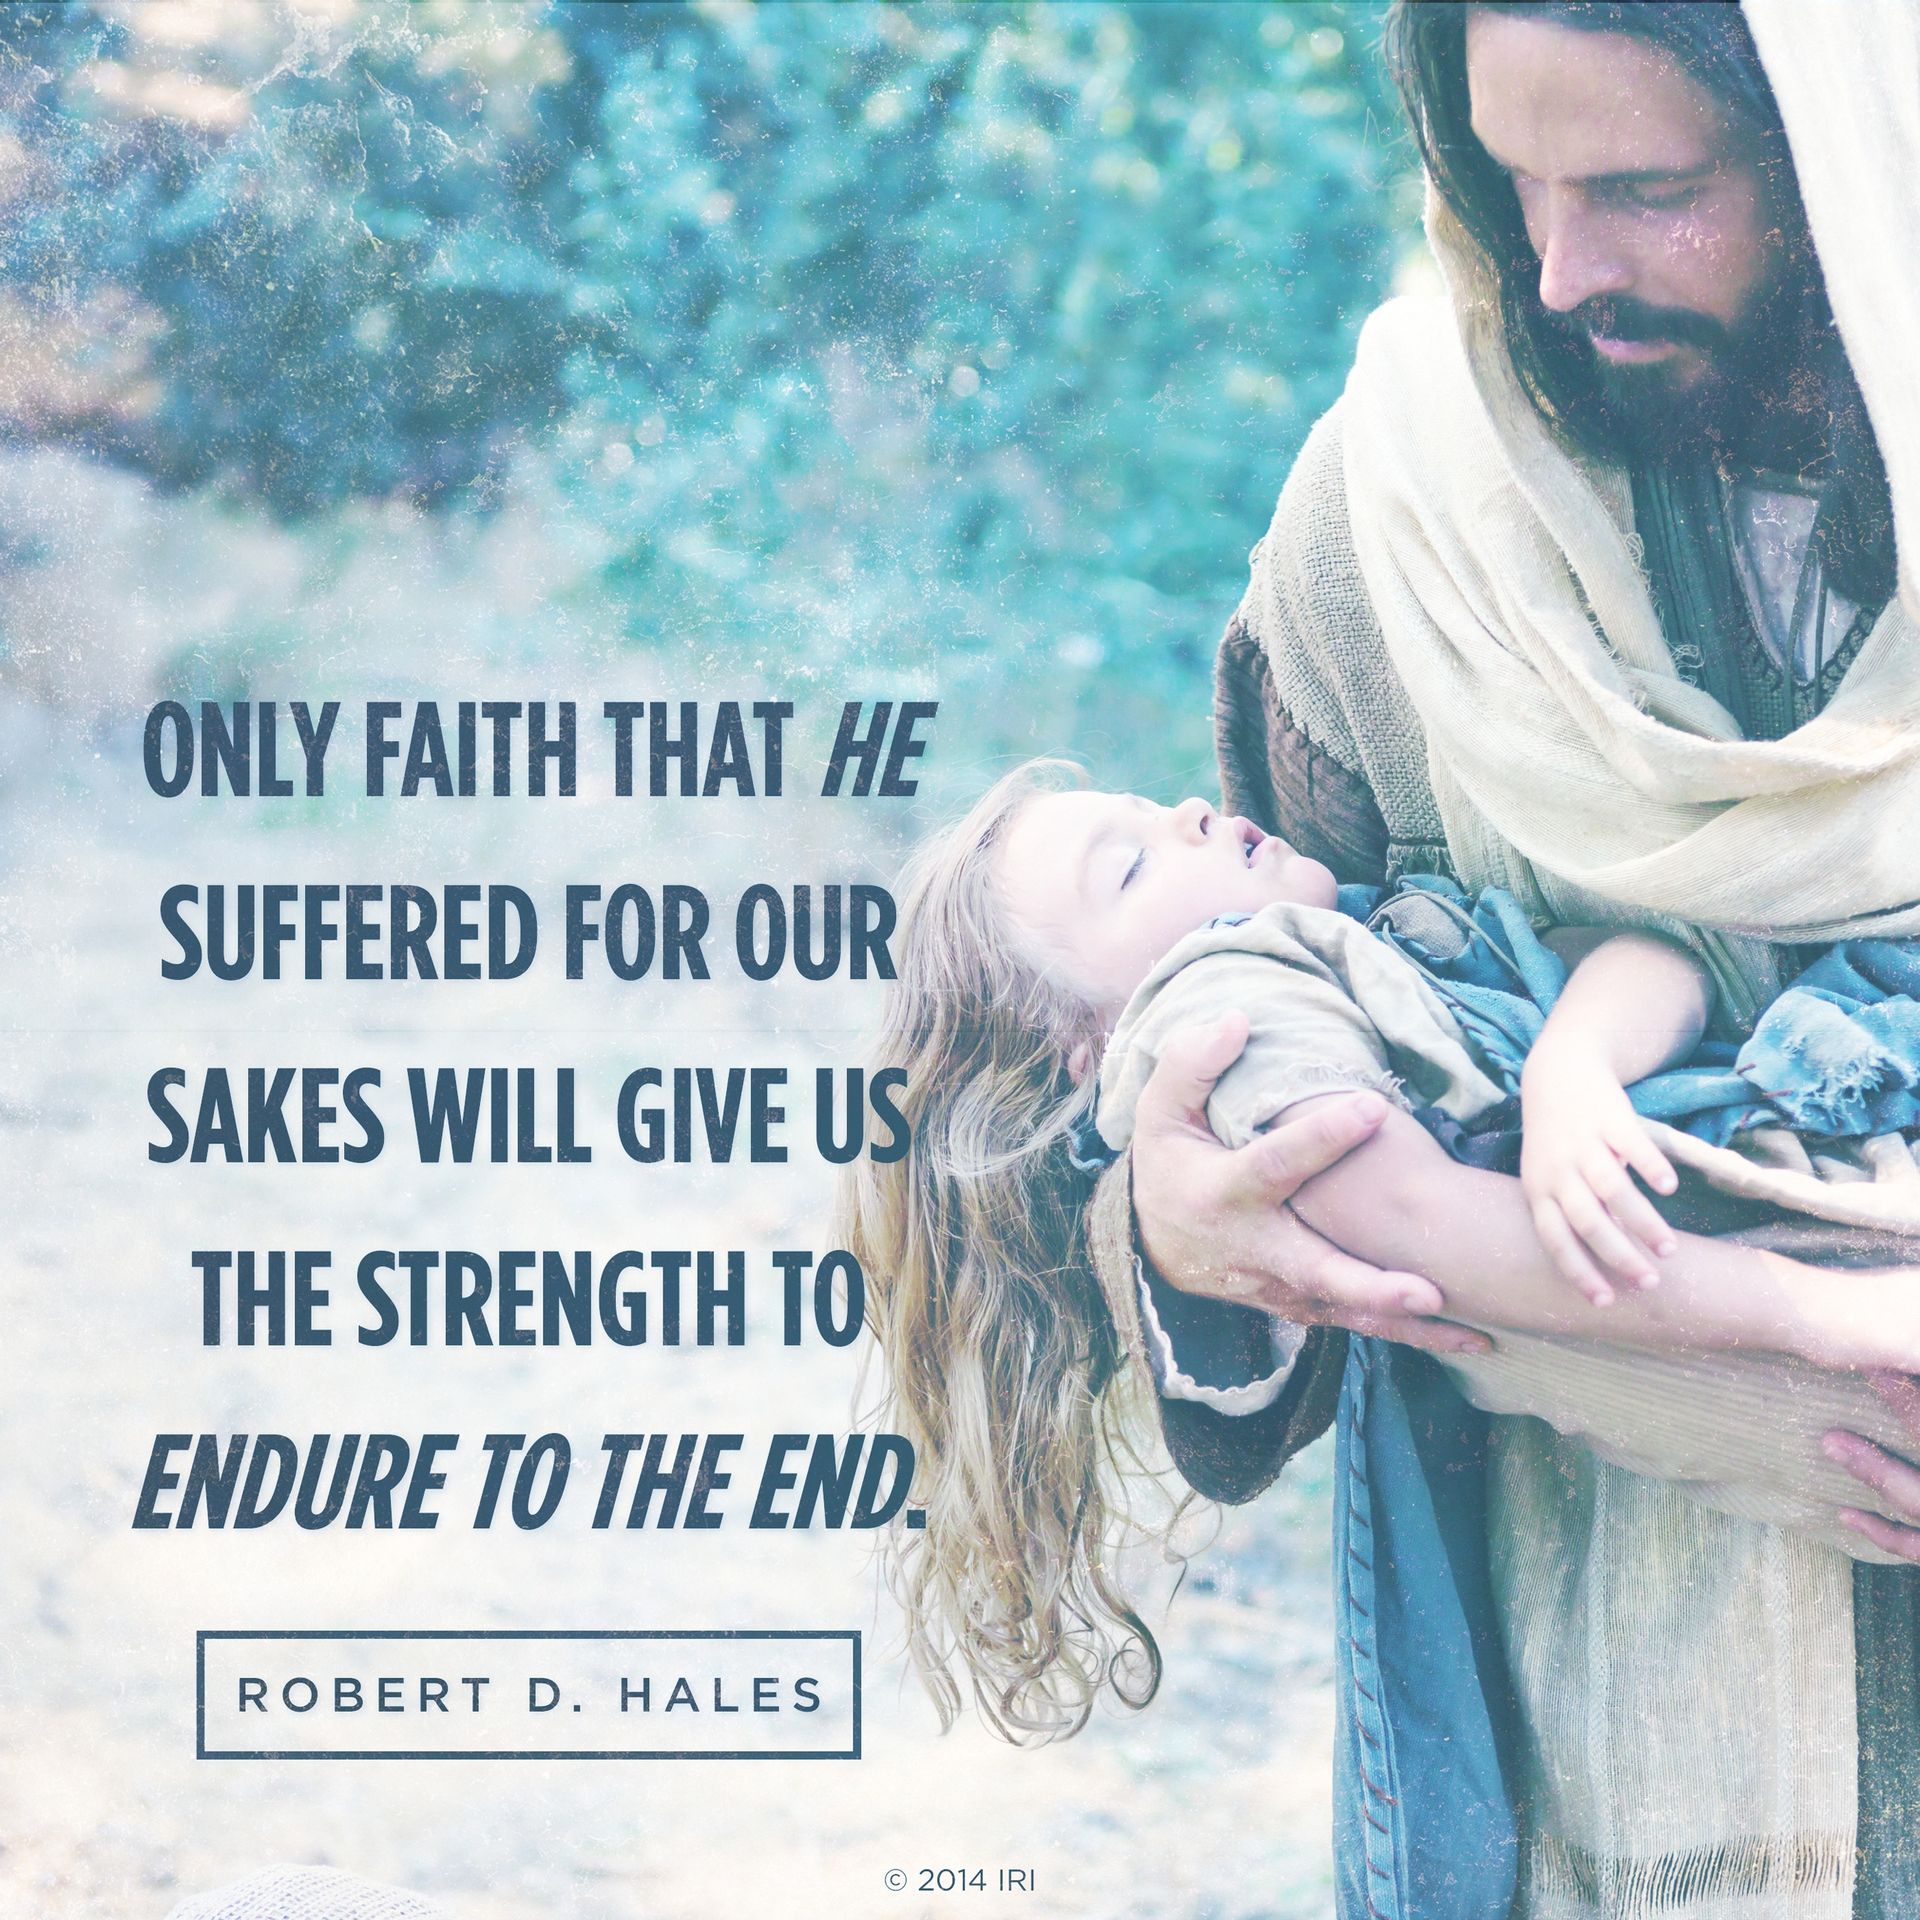 “Only faith that He suffered for our sakes will give us the strength to endure to the end.”—Elder Robert D. Hales, “Finding Faith in the Lord Jesus Christ”